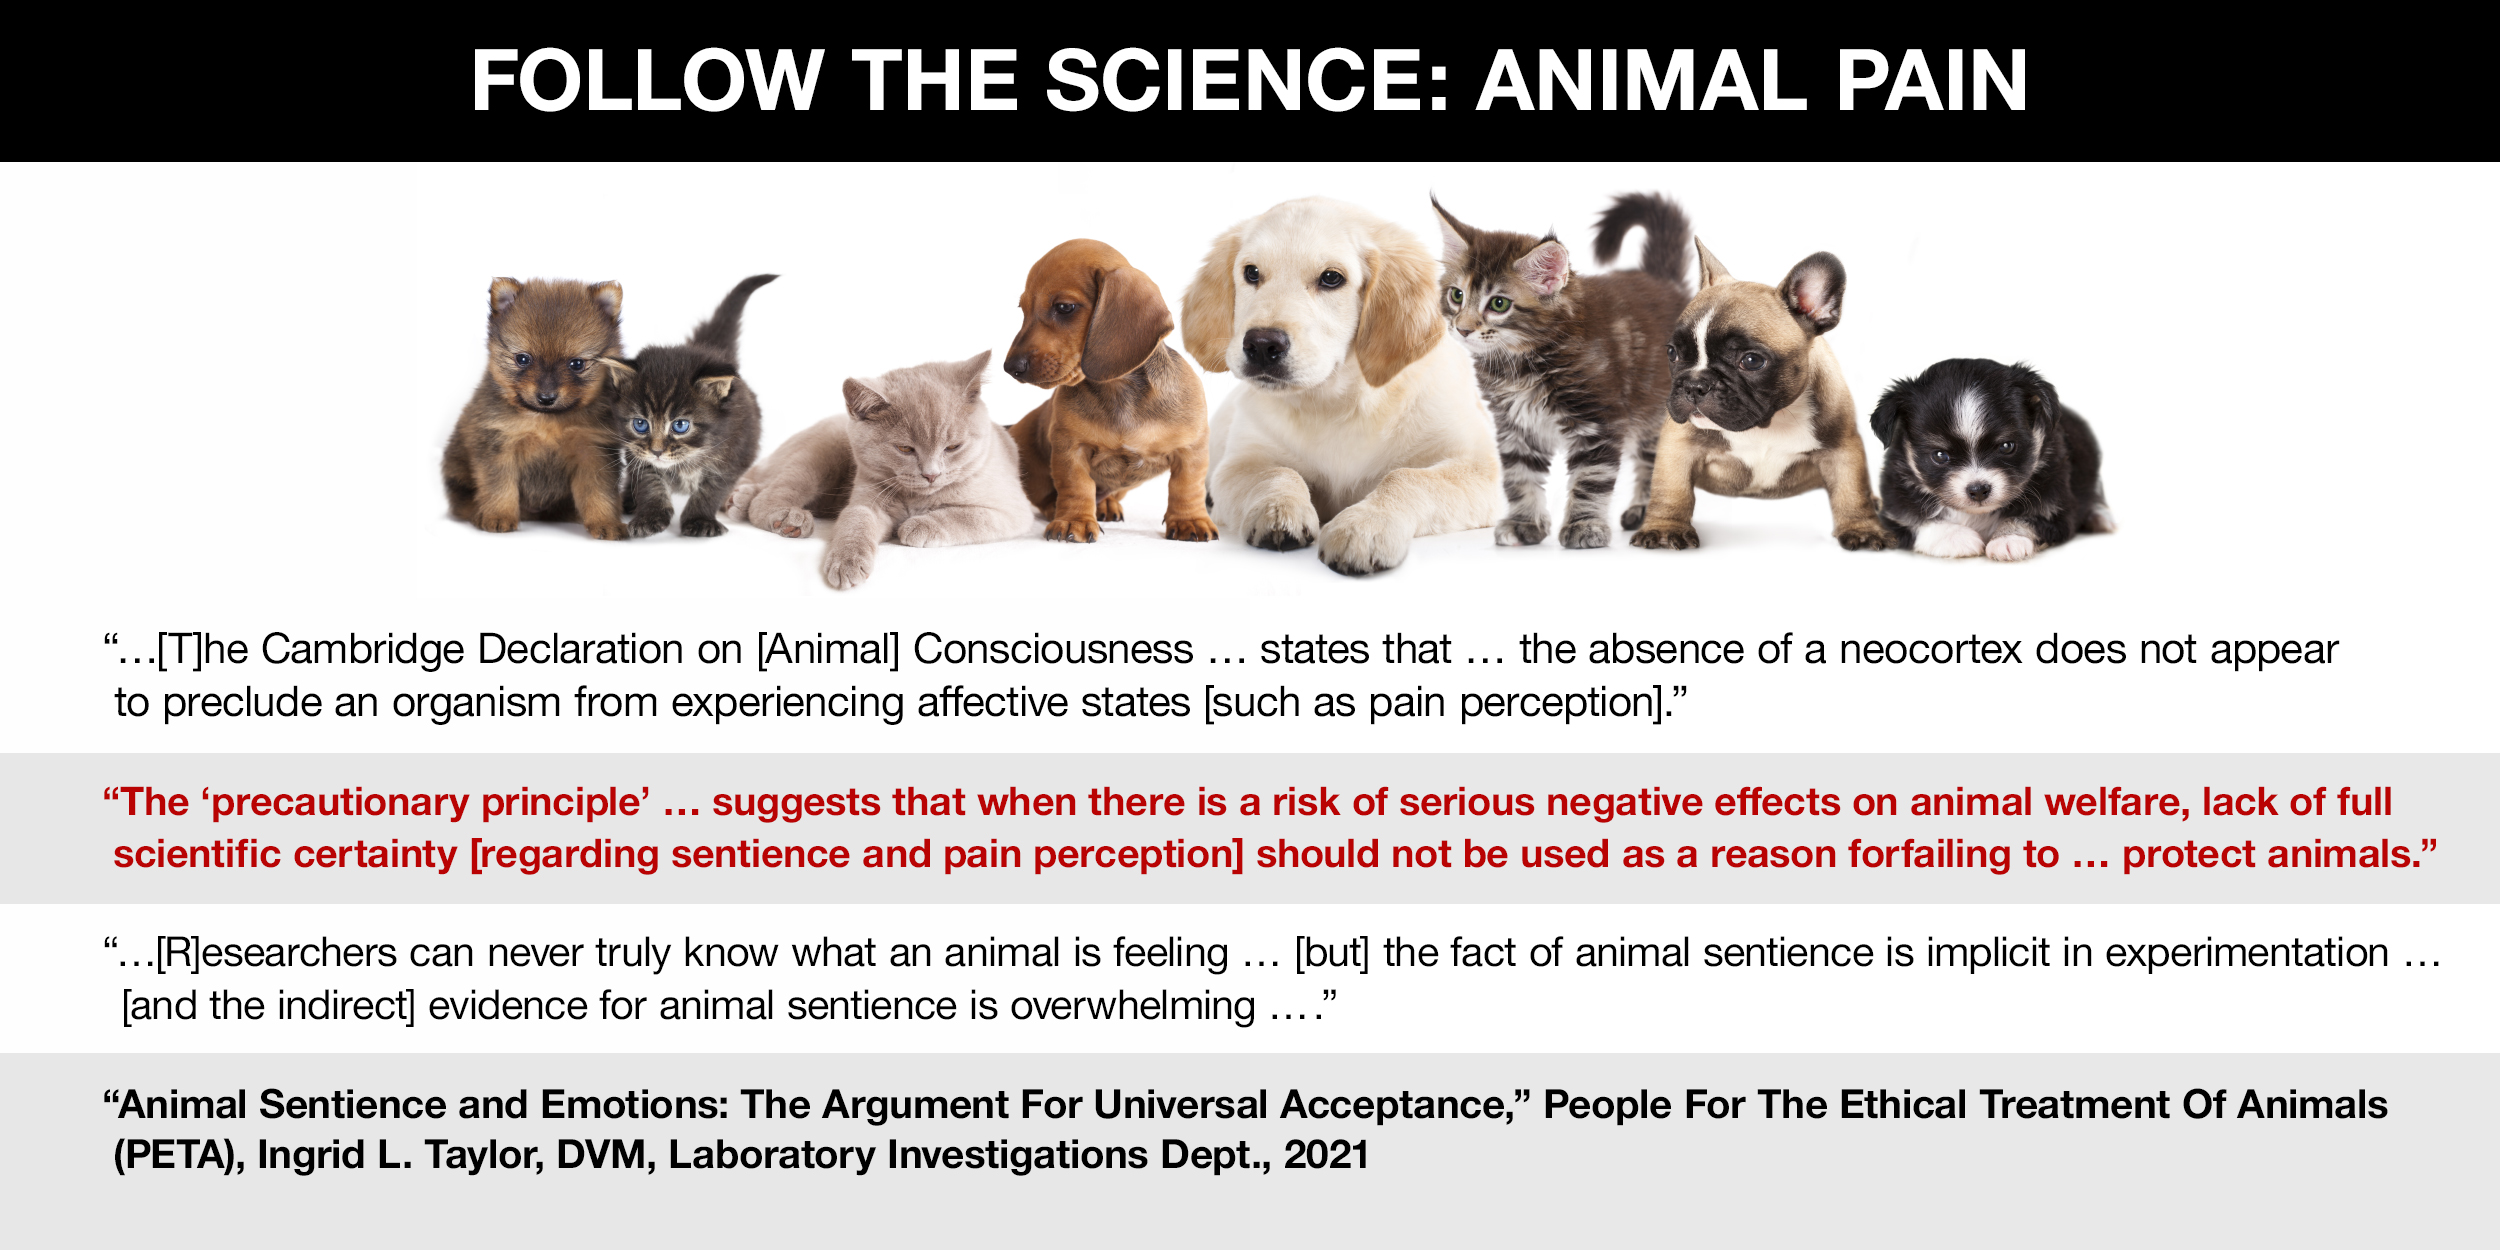 Follow the Science: Animal Pain - The precautionary principle suggests that when there is a risk of serious negative effects on animal welfare a lack of certainty should not be used as a reason